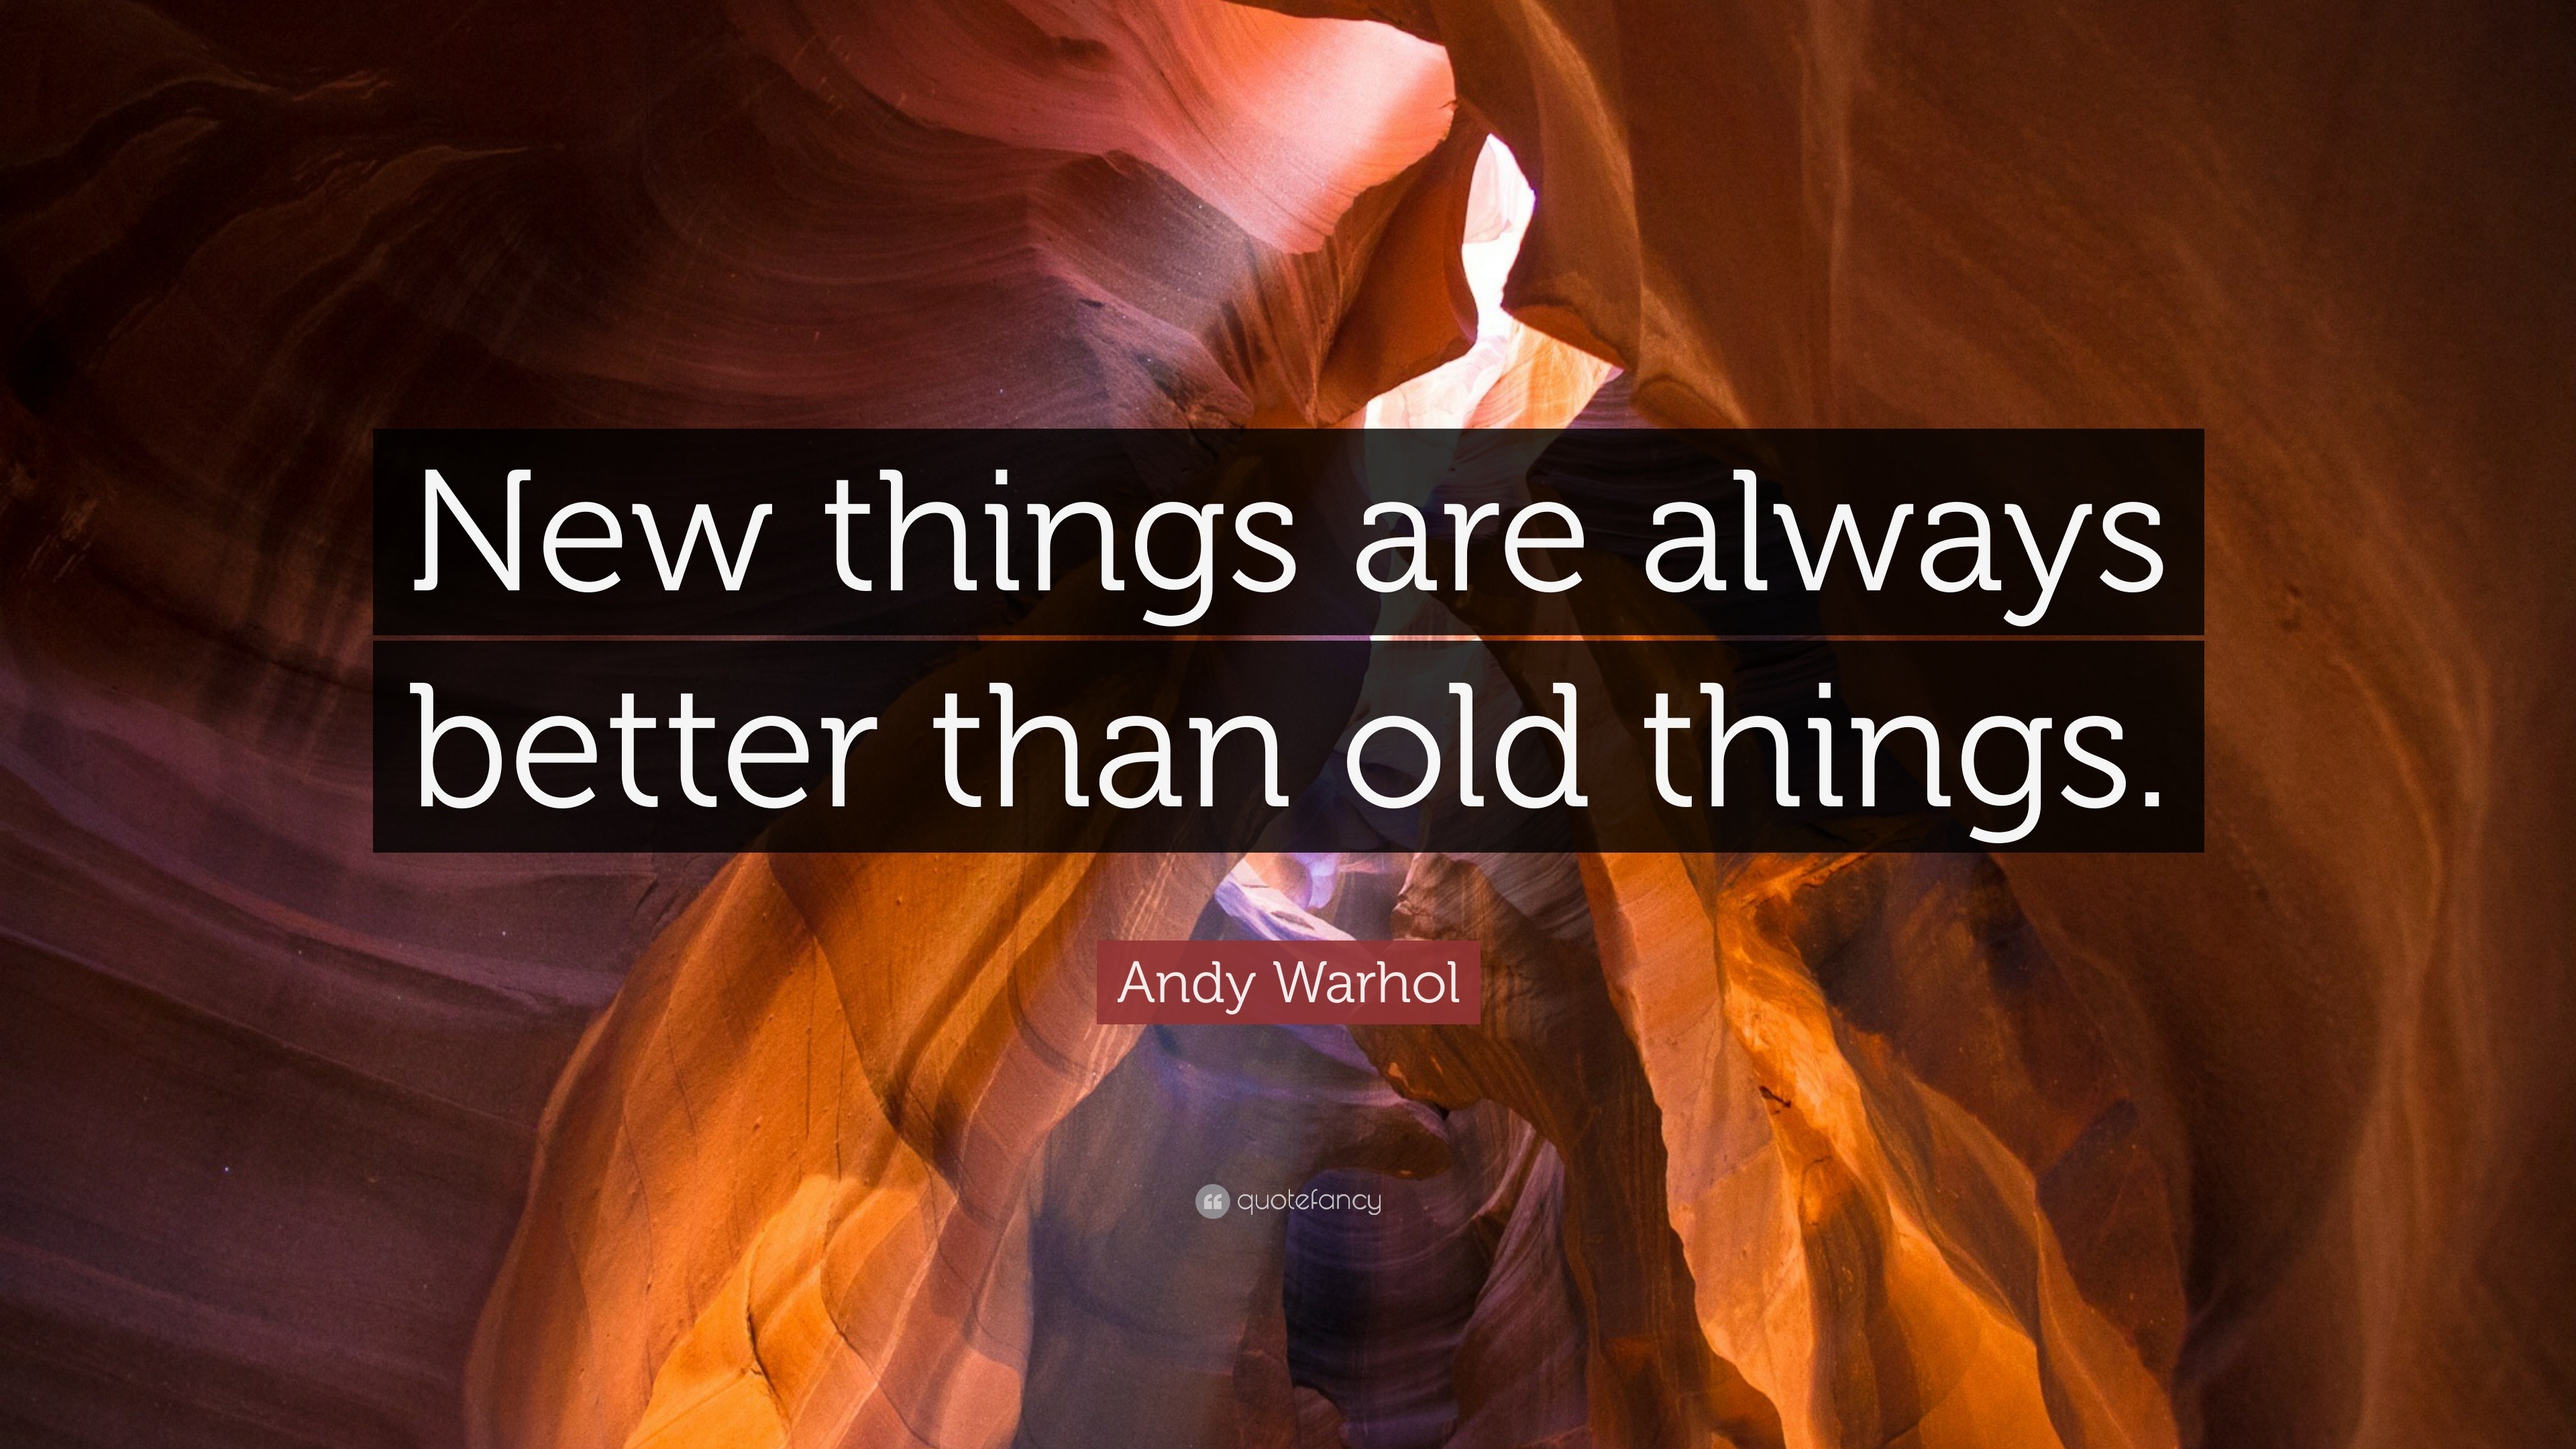 Andy Warhol Quote: “New Things Are Always Better Than Old Things.”